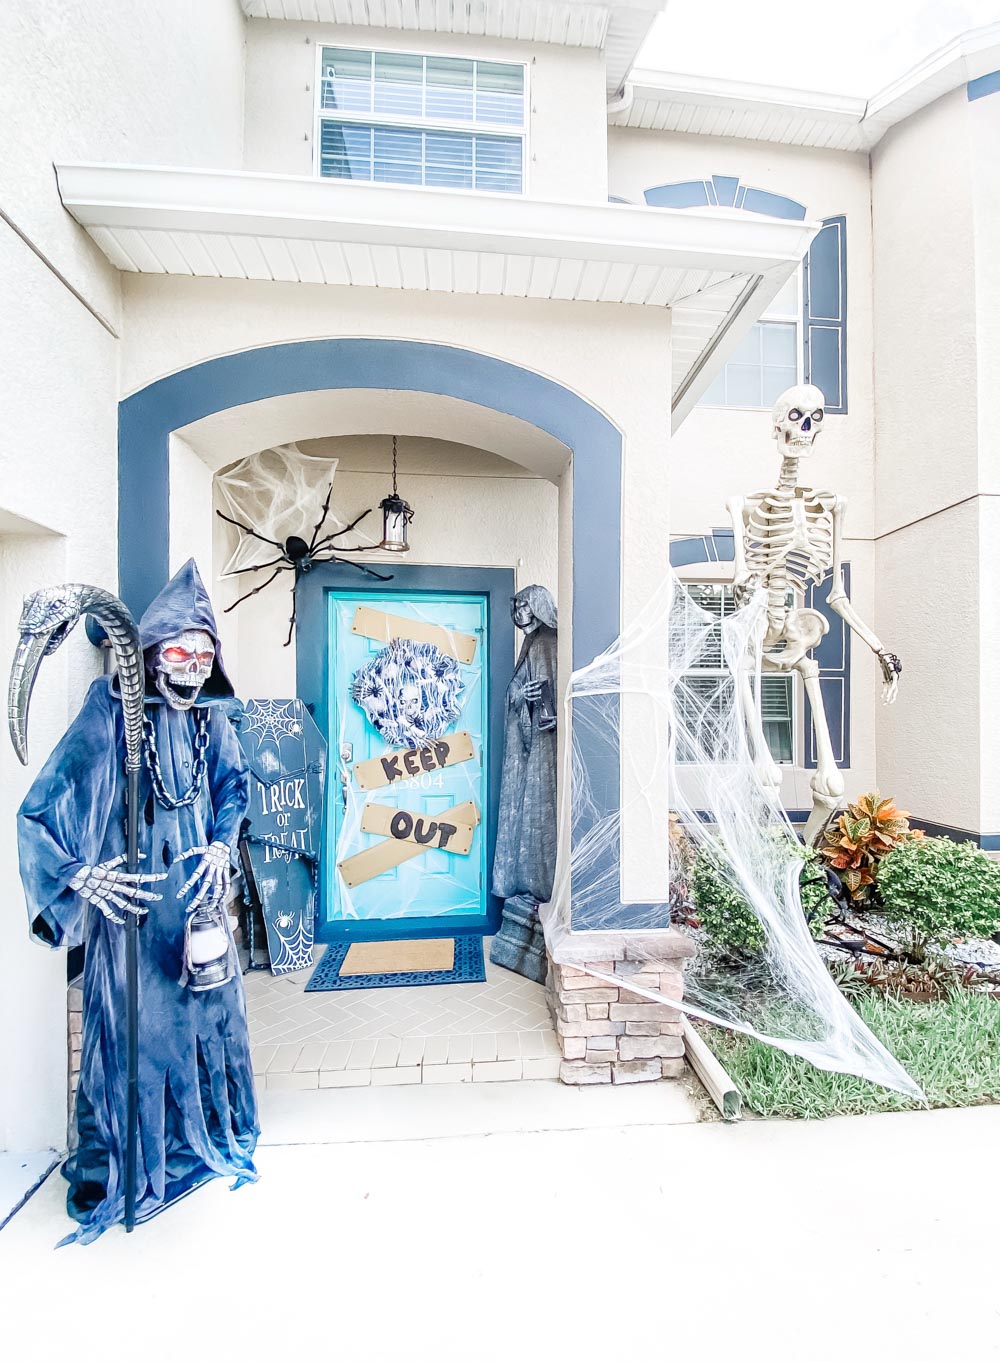 A Halloween front porch decorated as a spooky cemetery.